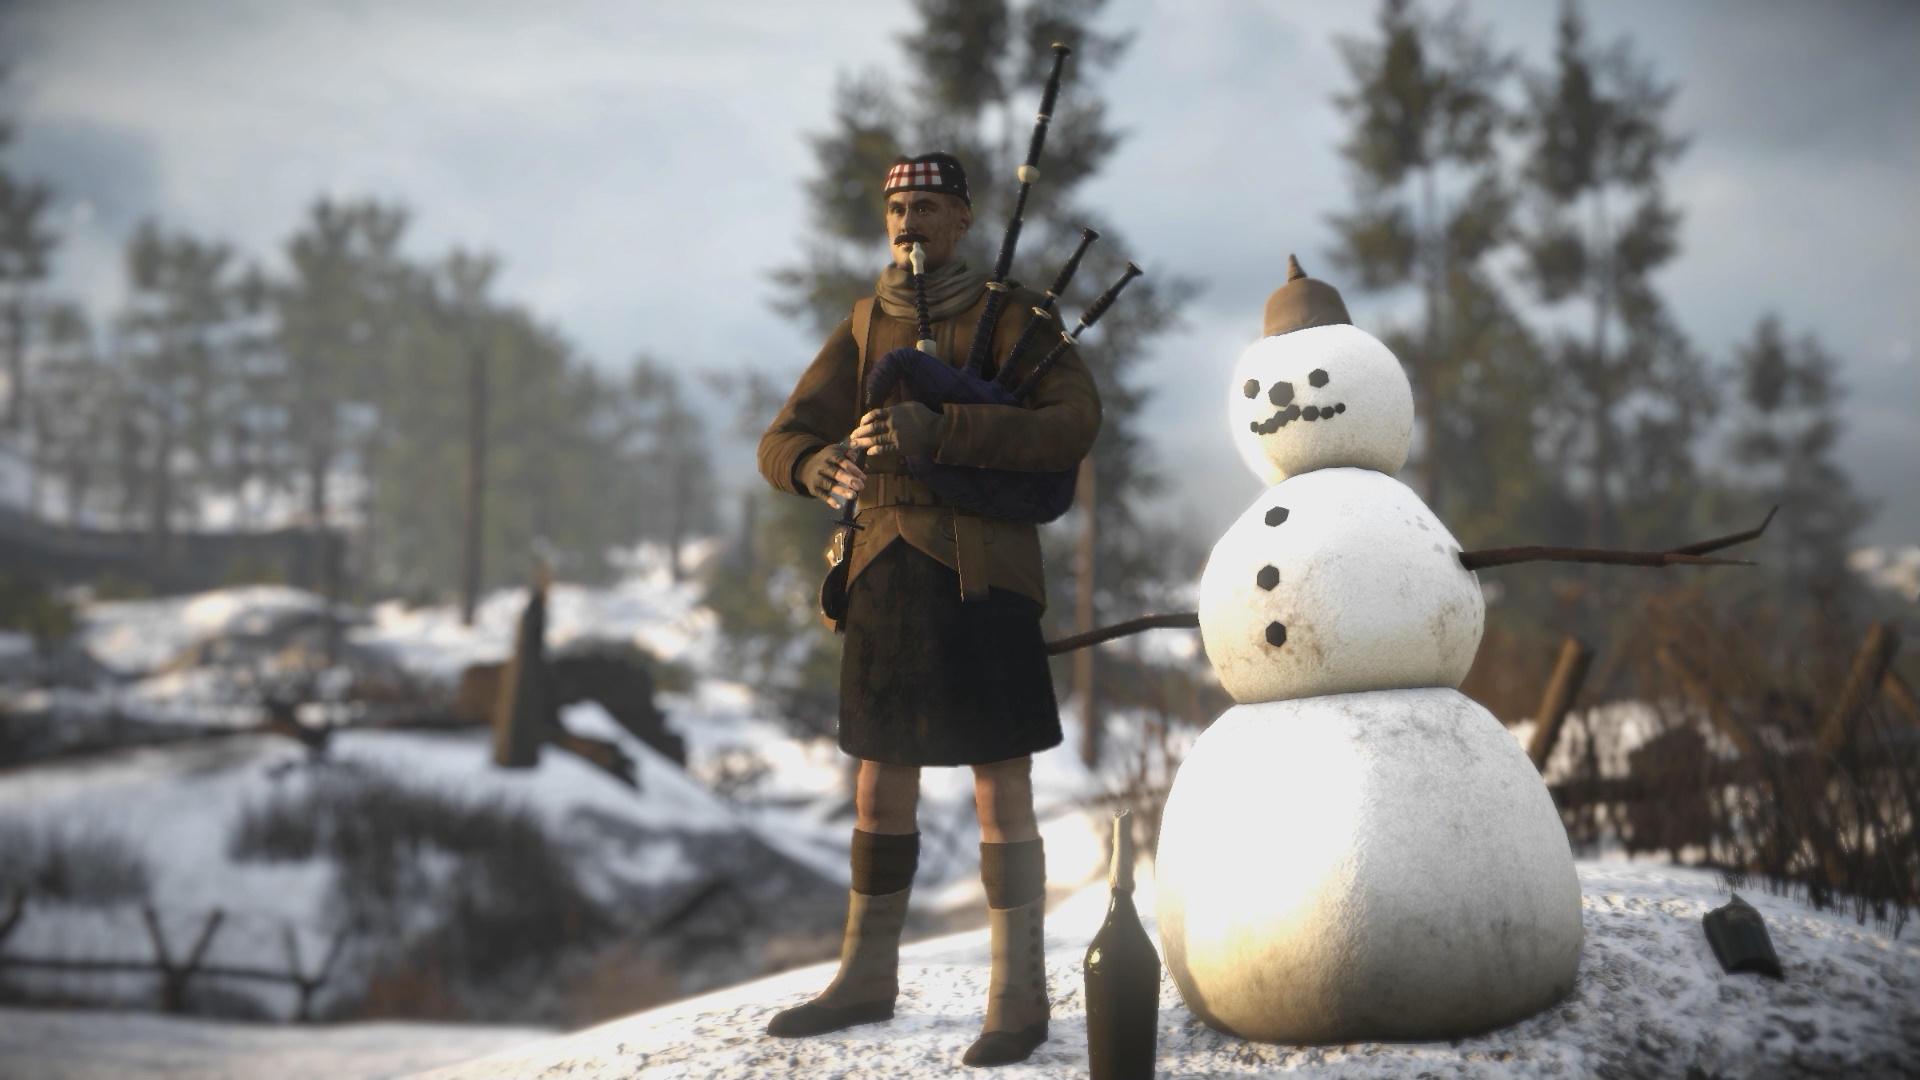 An in-game image of a Scottish bagpiper next to a snowman.